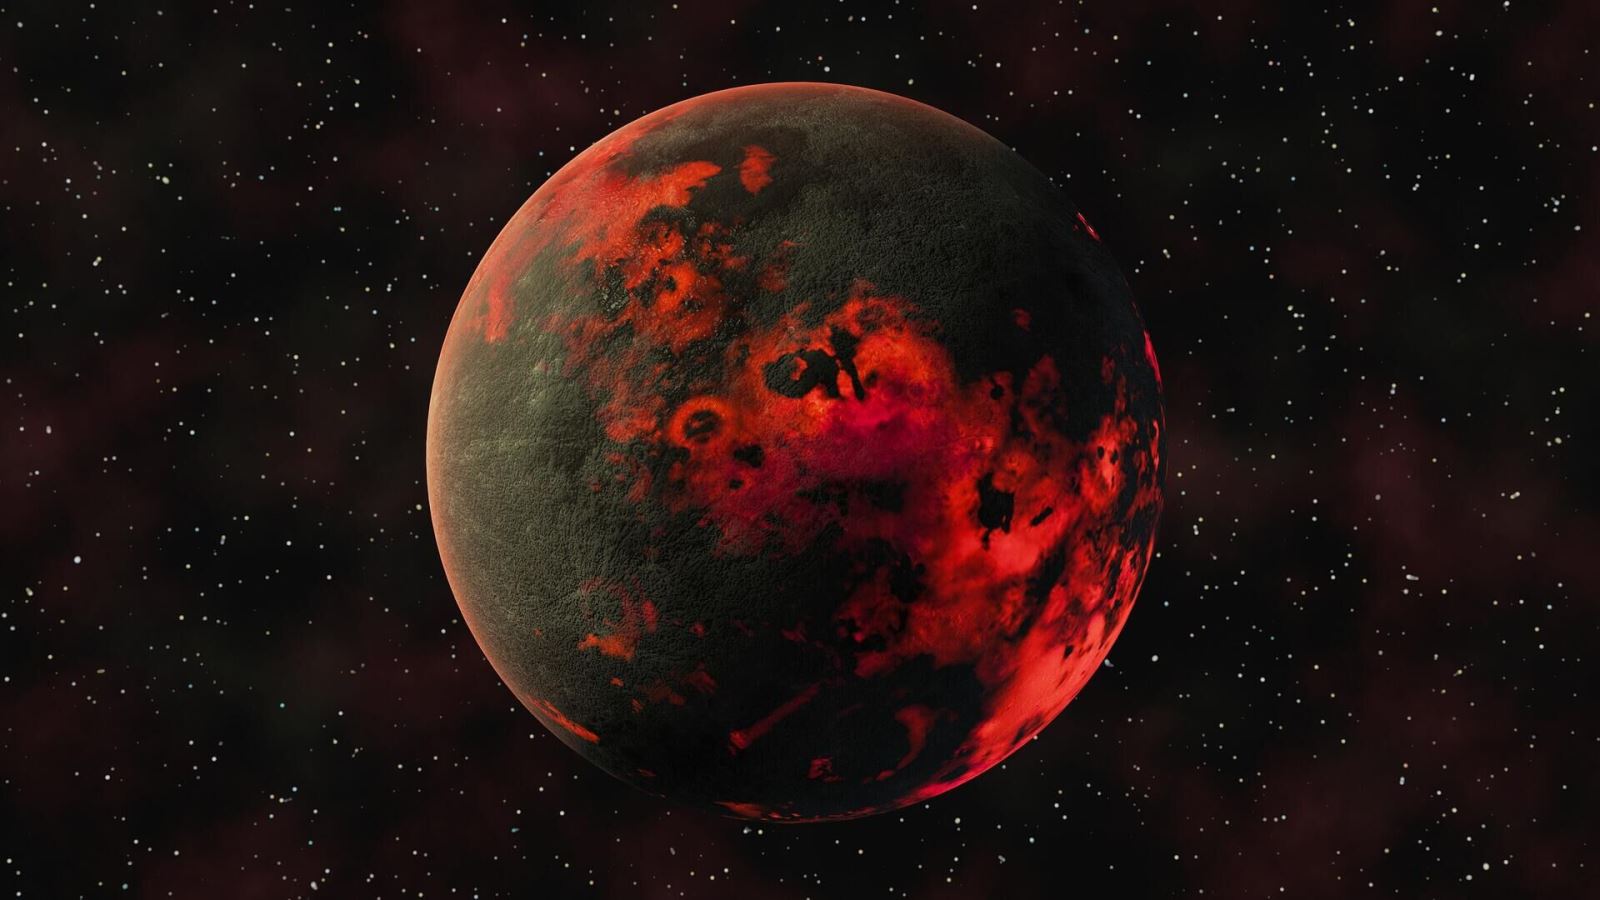 The mystery of the ‘hell’ planet covered by lava